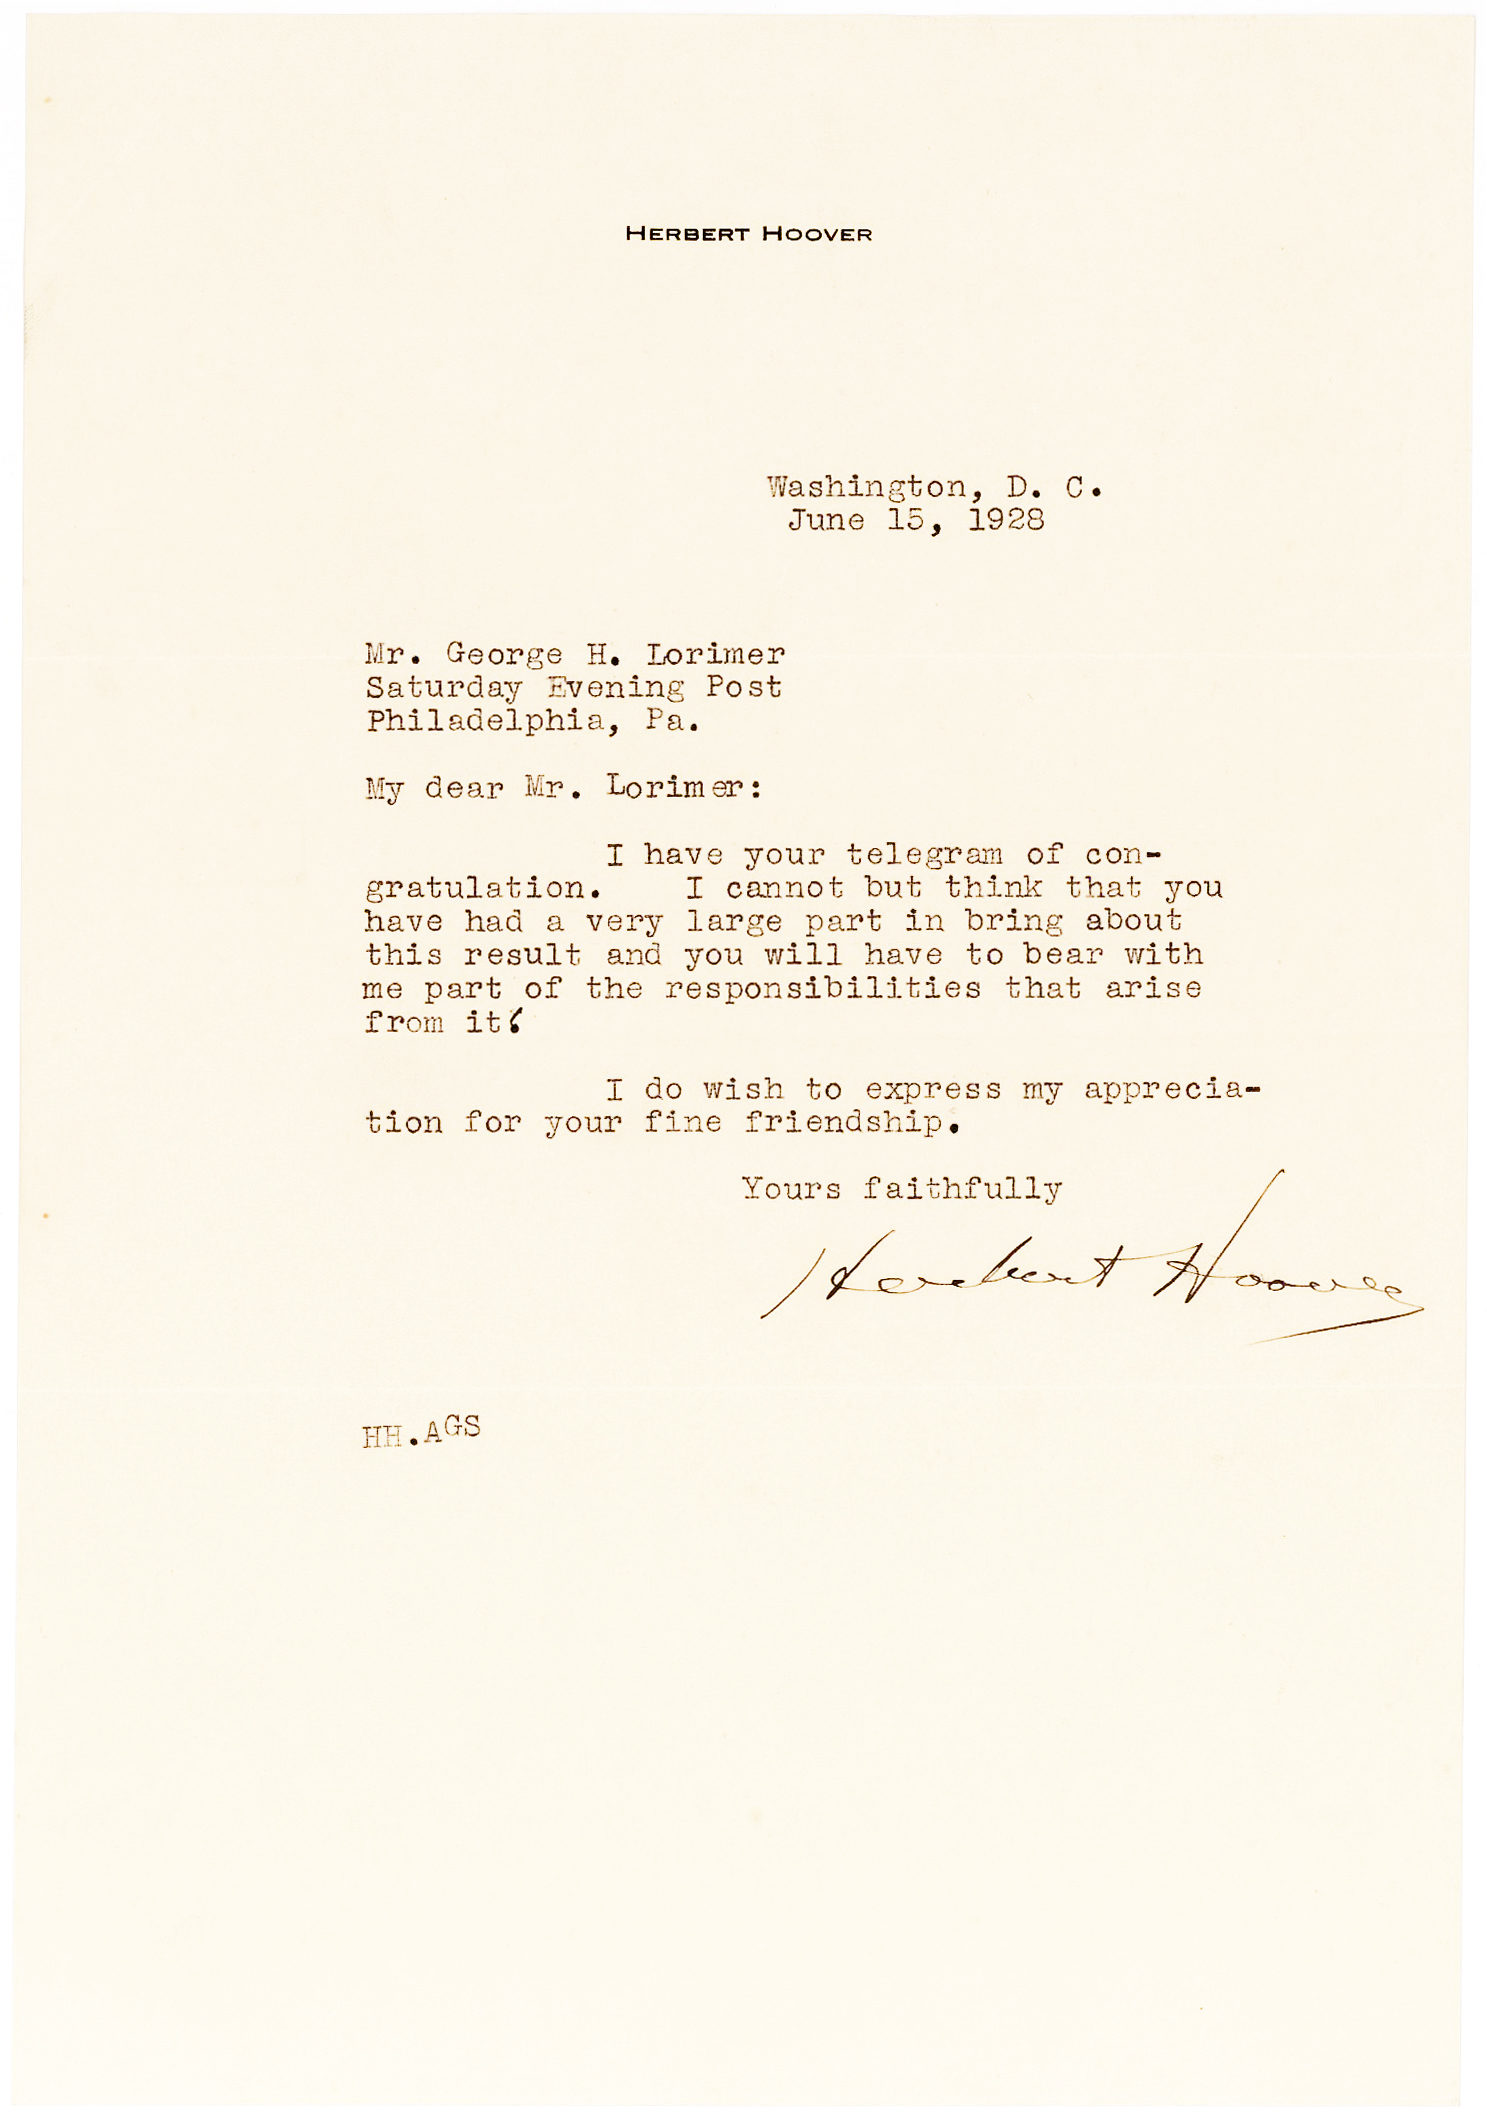 Herbert Hoover to his Friend and Supporter: “I cannot but think that you have had a very large part in bring [sic] about this result and you will have to bear with me part of the responsibilities that arise from it.”